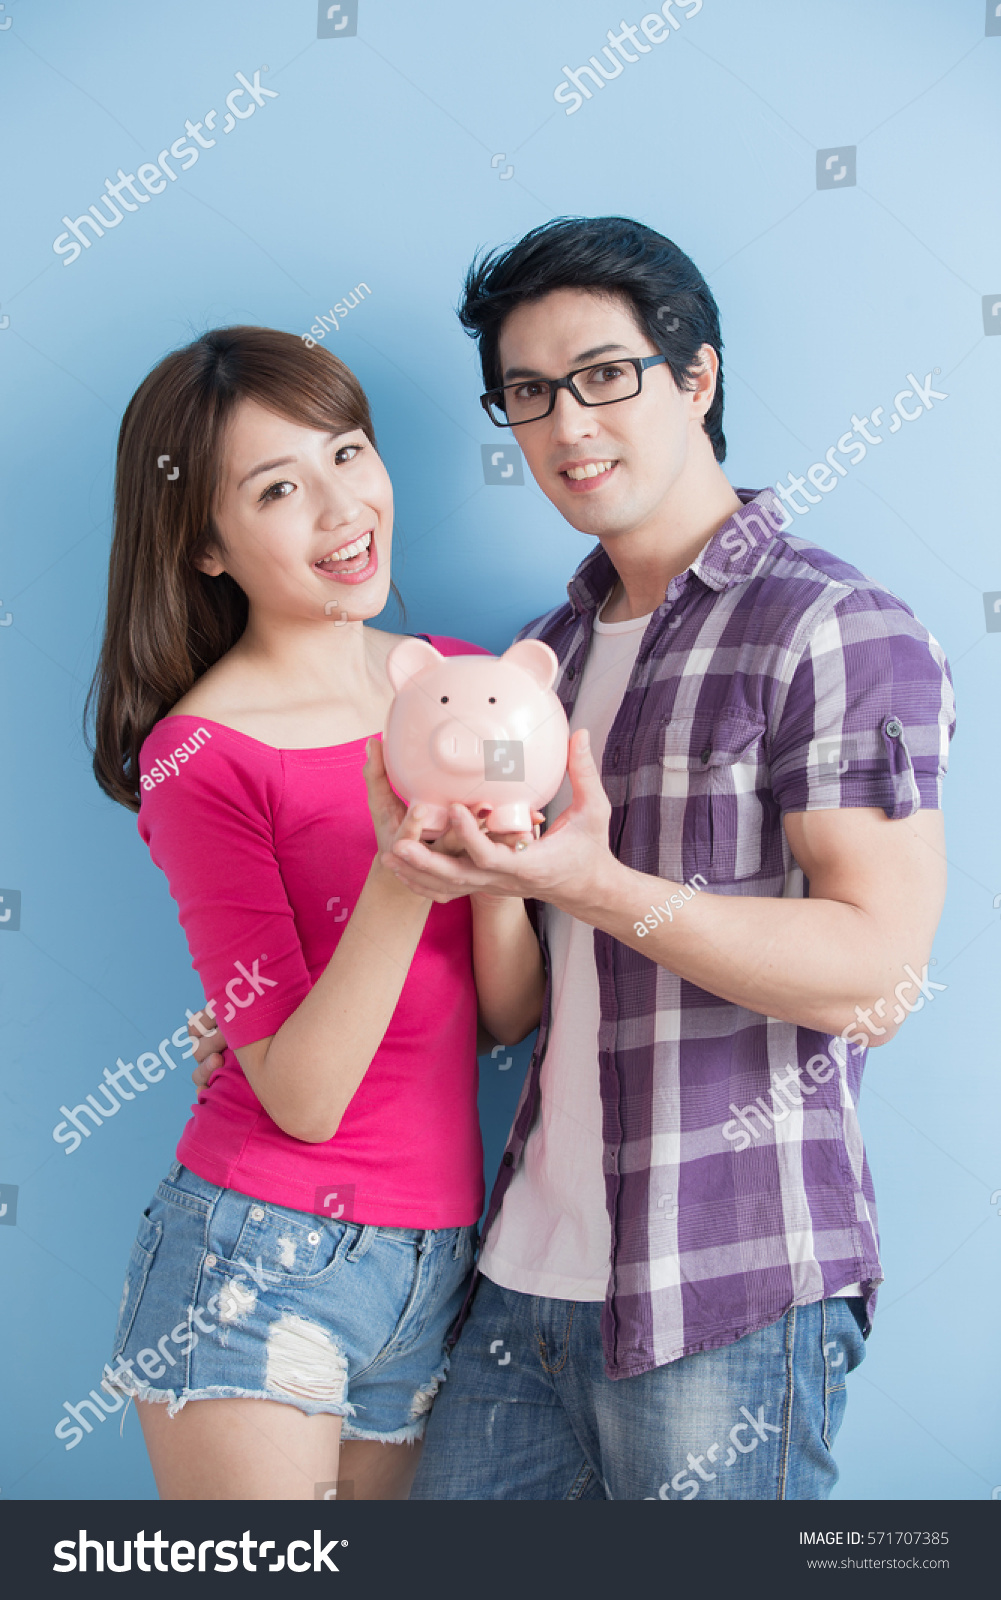 young couple hold pink pig bank and smile happily isolated on blue background #571707385